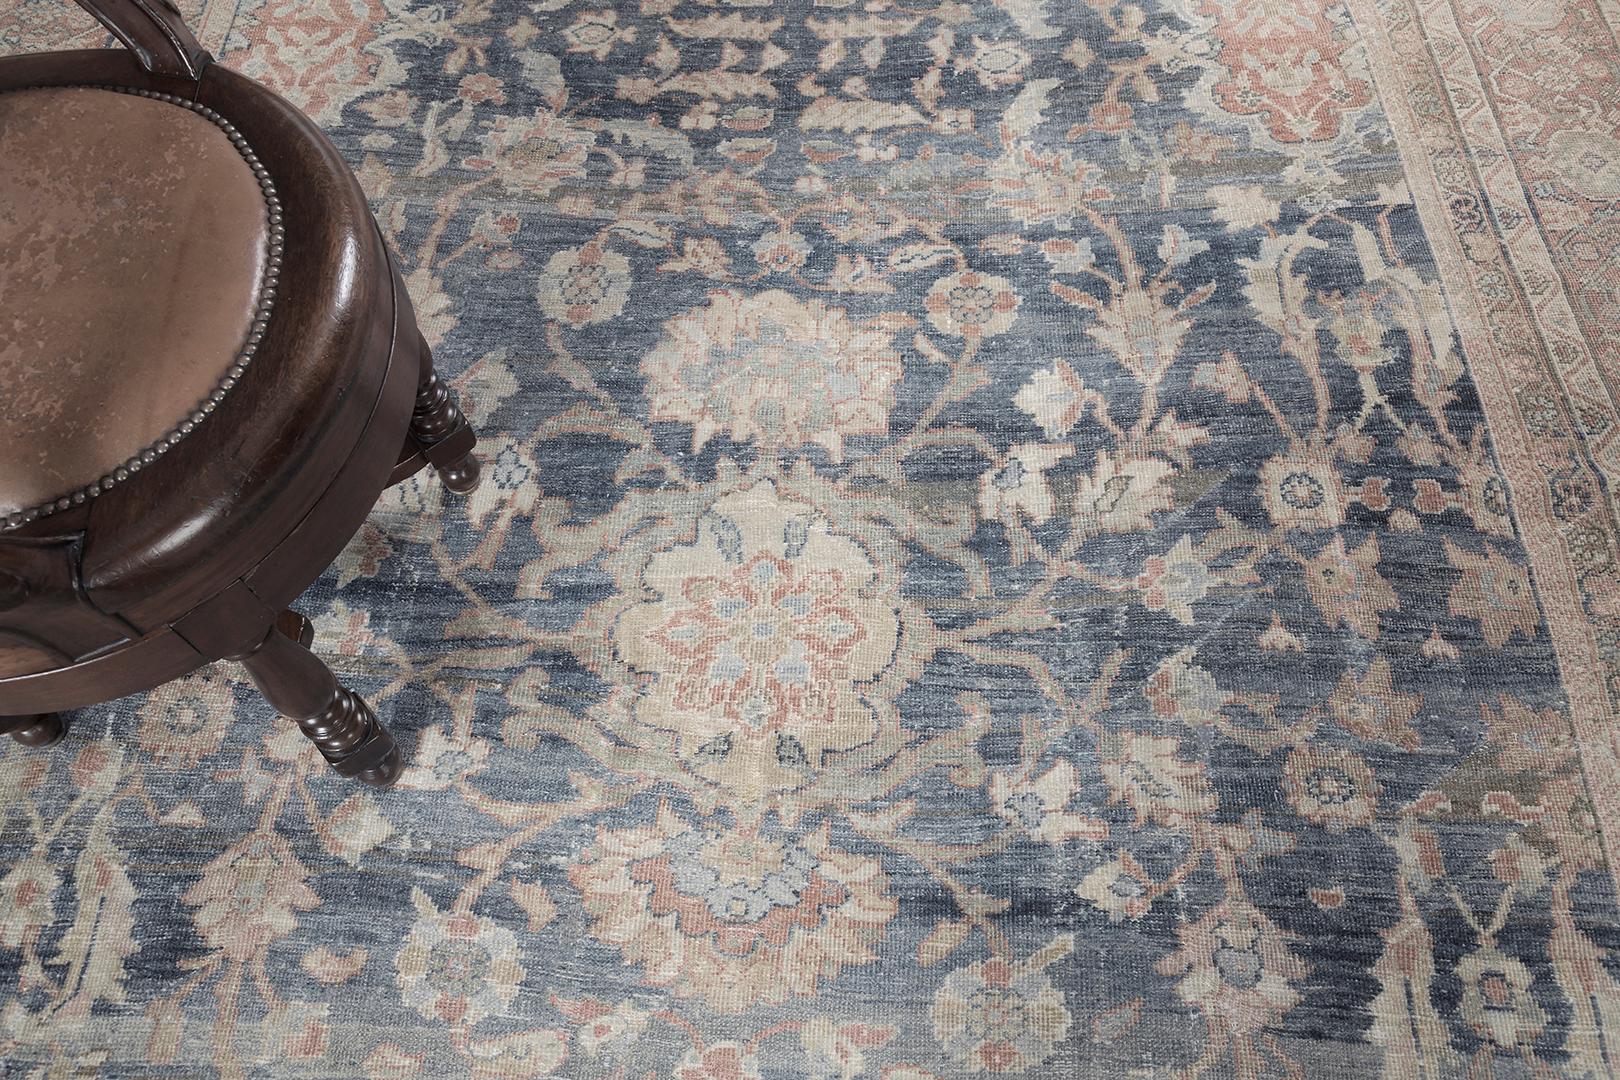 Feel the luxury vibes from our timeless collection that features the all-over florid patterns in midnight blue field surrounded by a warm color palette of scrolling patterns. This picturesque Persian Mahal rug provides a warm and friendly